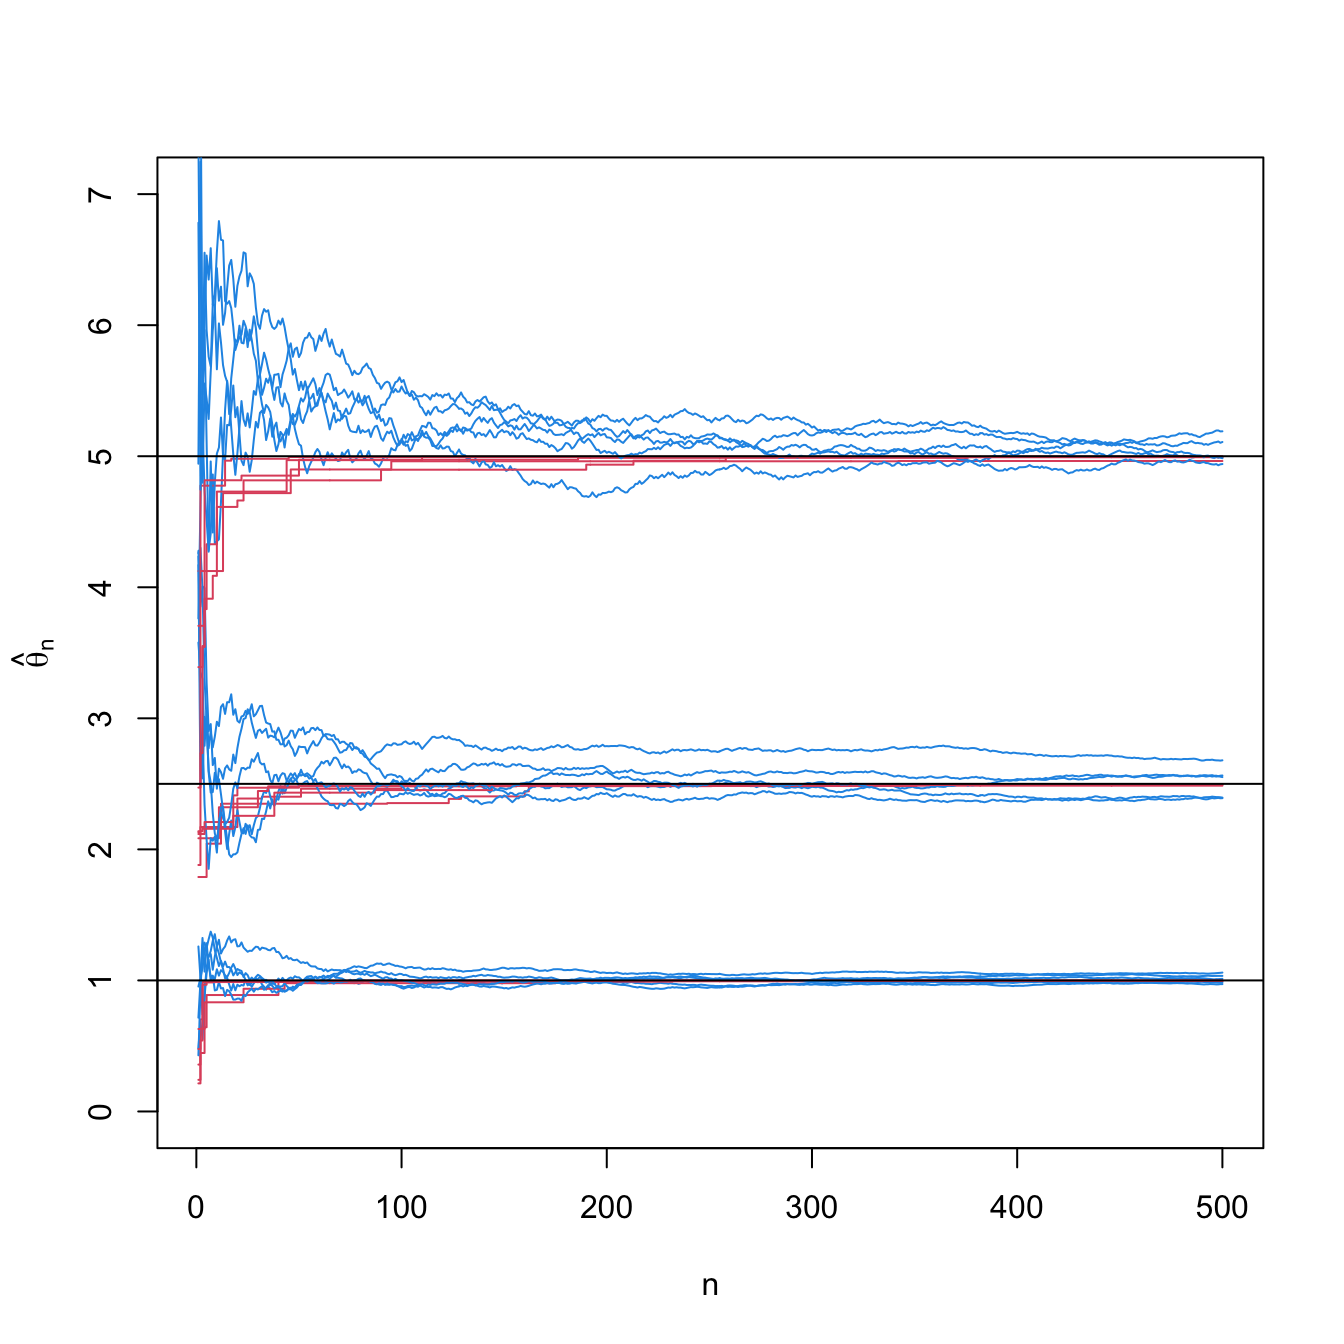 Convergence of the moment estimator \(\hat{\theta}_\mathrm{MM}\) (blue) and maximum likelihood estimator \(\hat{\theta}_\mathrm{MLE}\) (red) for \(\theta\) in a \(\mathcal{U}(0,\theta)\) population. For \(\theta=1,2.5,5,\) \(N=5\) srs’s of sizes increasing until \(n=500\) were simulated. The black horizontal lines represent the values of \(\theta.\) The maximum likelihood estimator is more efficient than the moment estimator, as evidenced by the faster convergence of the former.